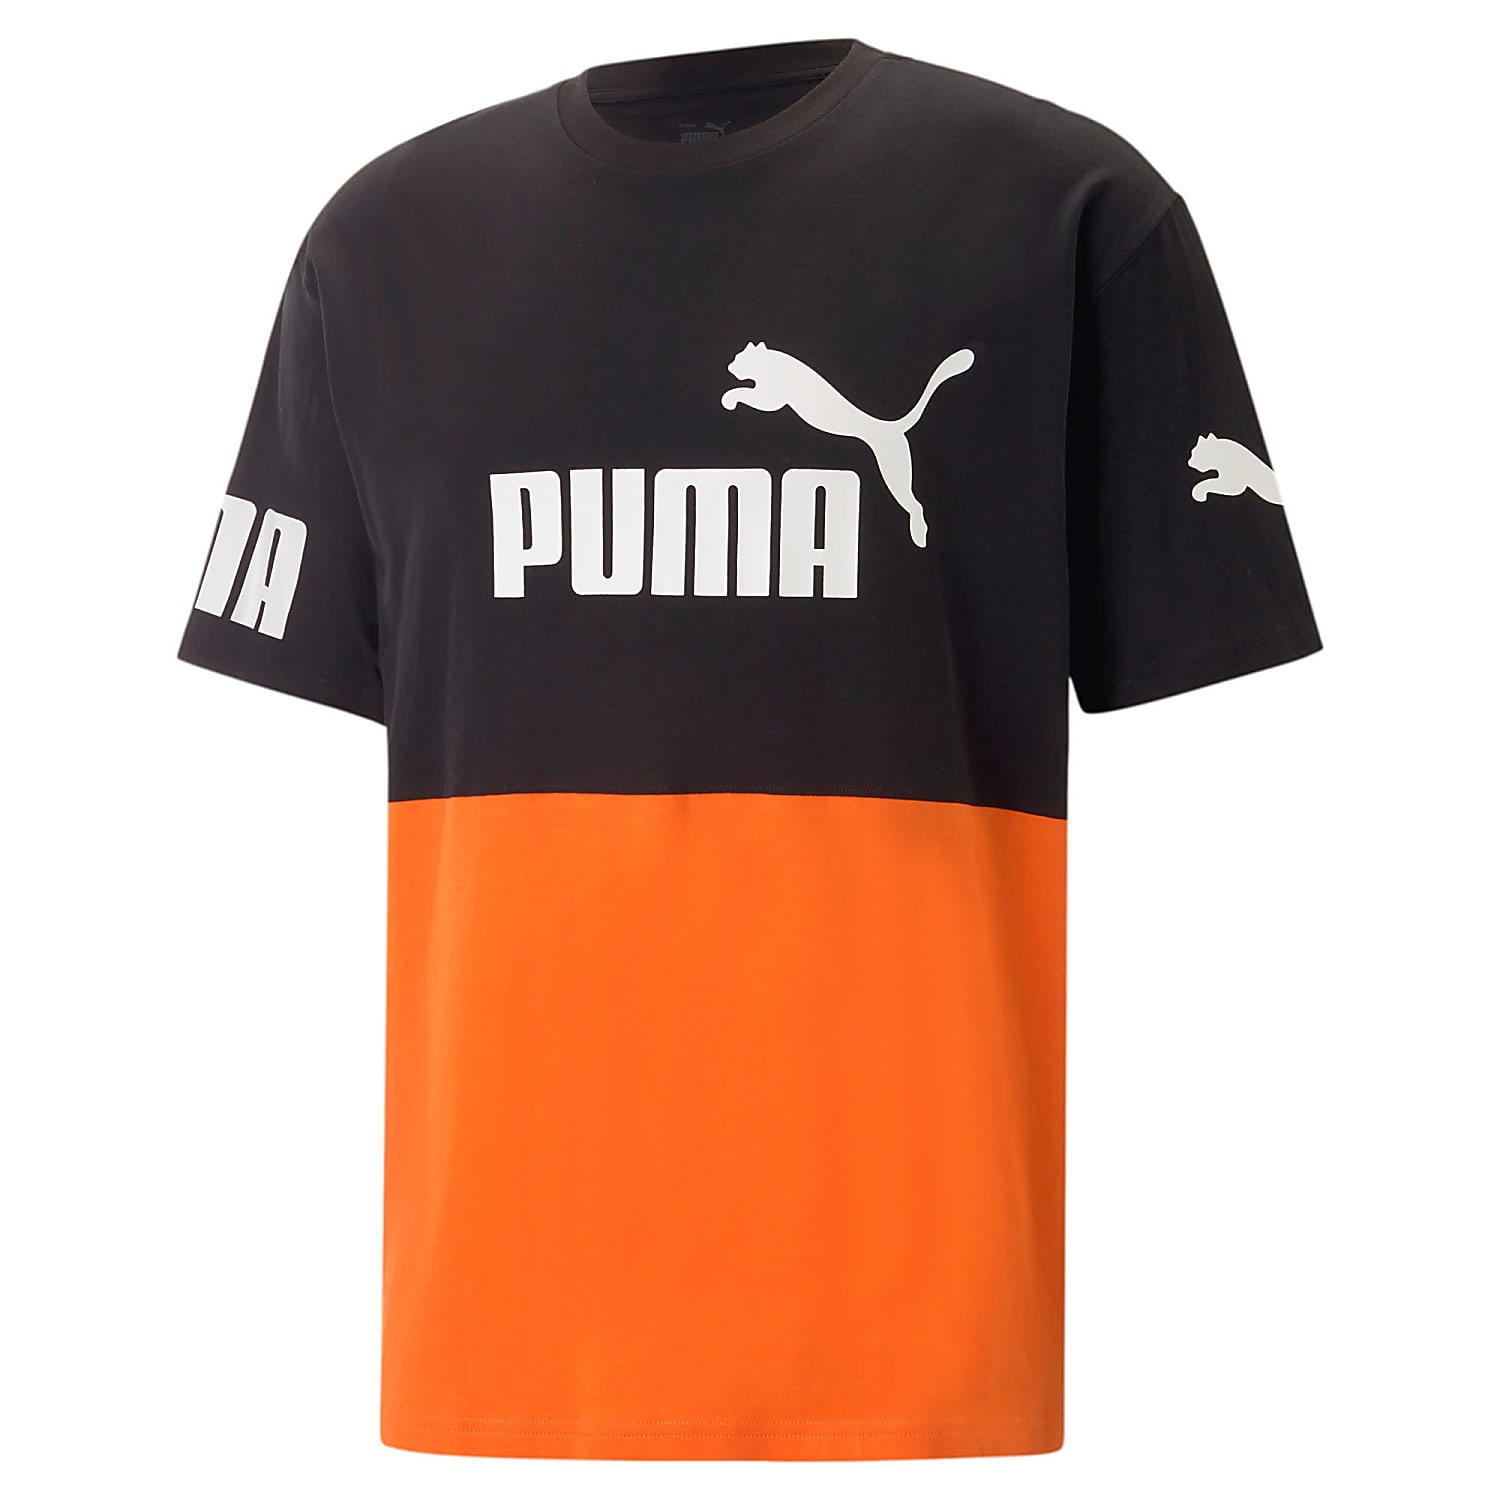 Puma M and PUMA TEE, Pepper Fast Cayenne cheap COLORBLOCK - POWER shipping